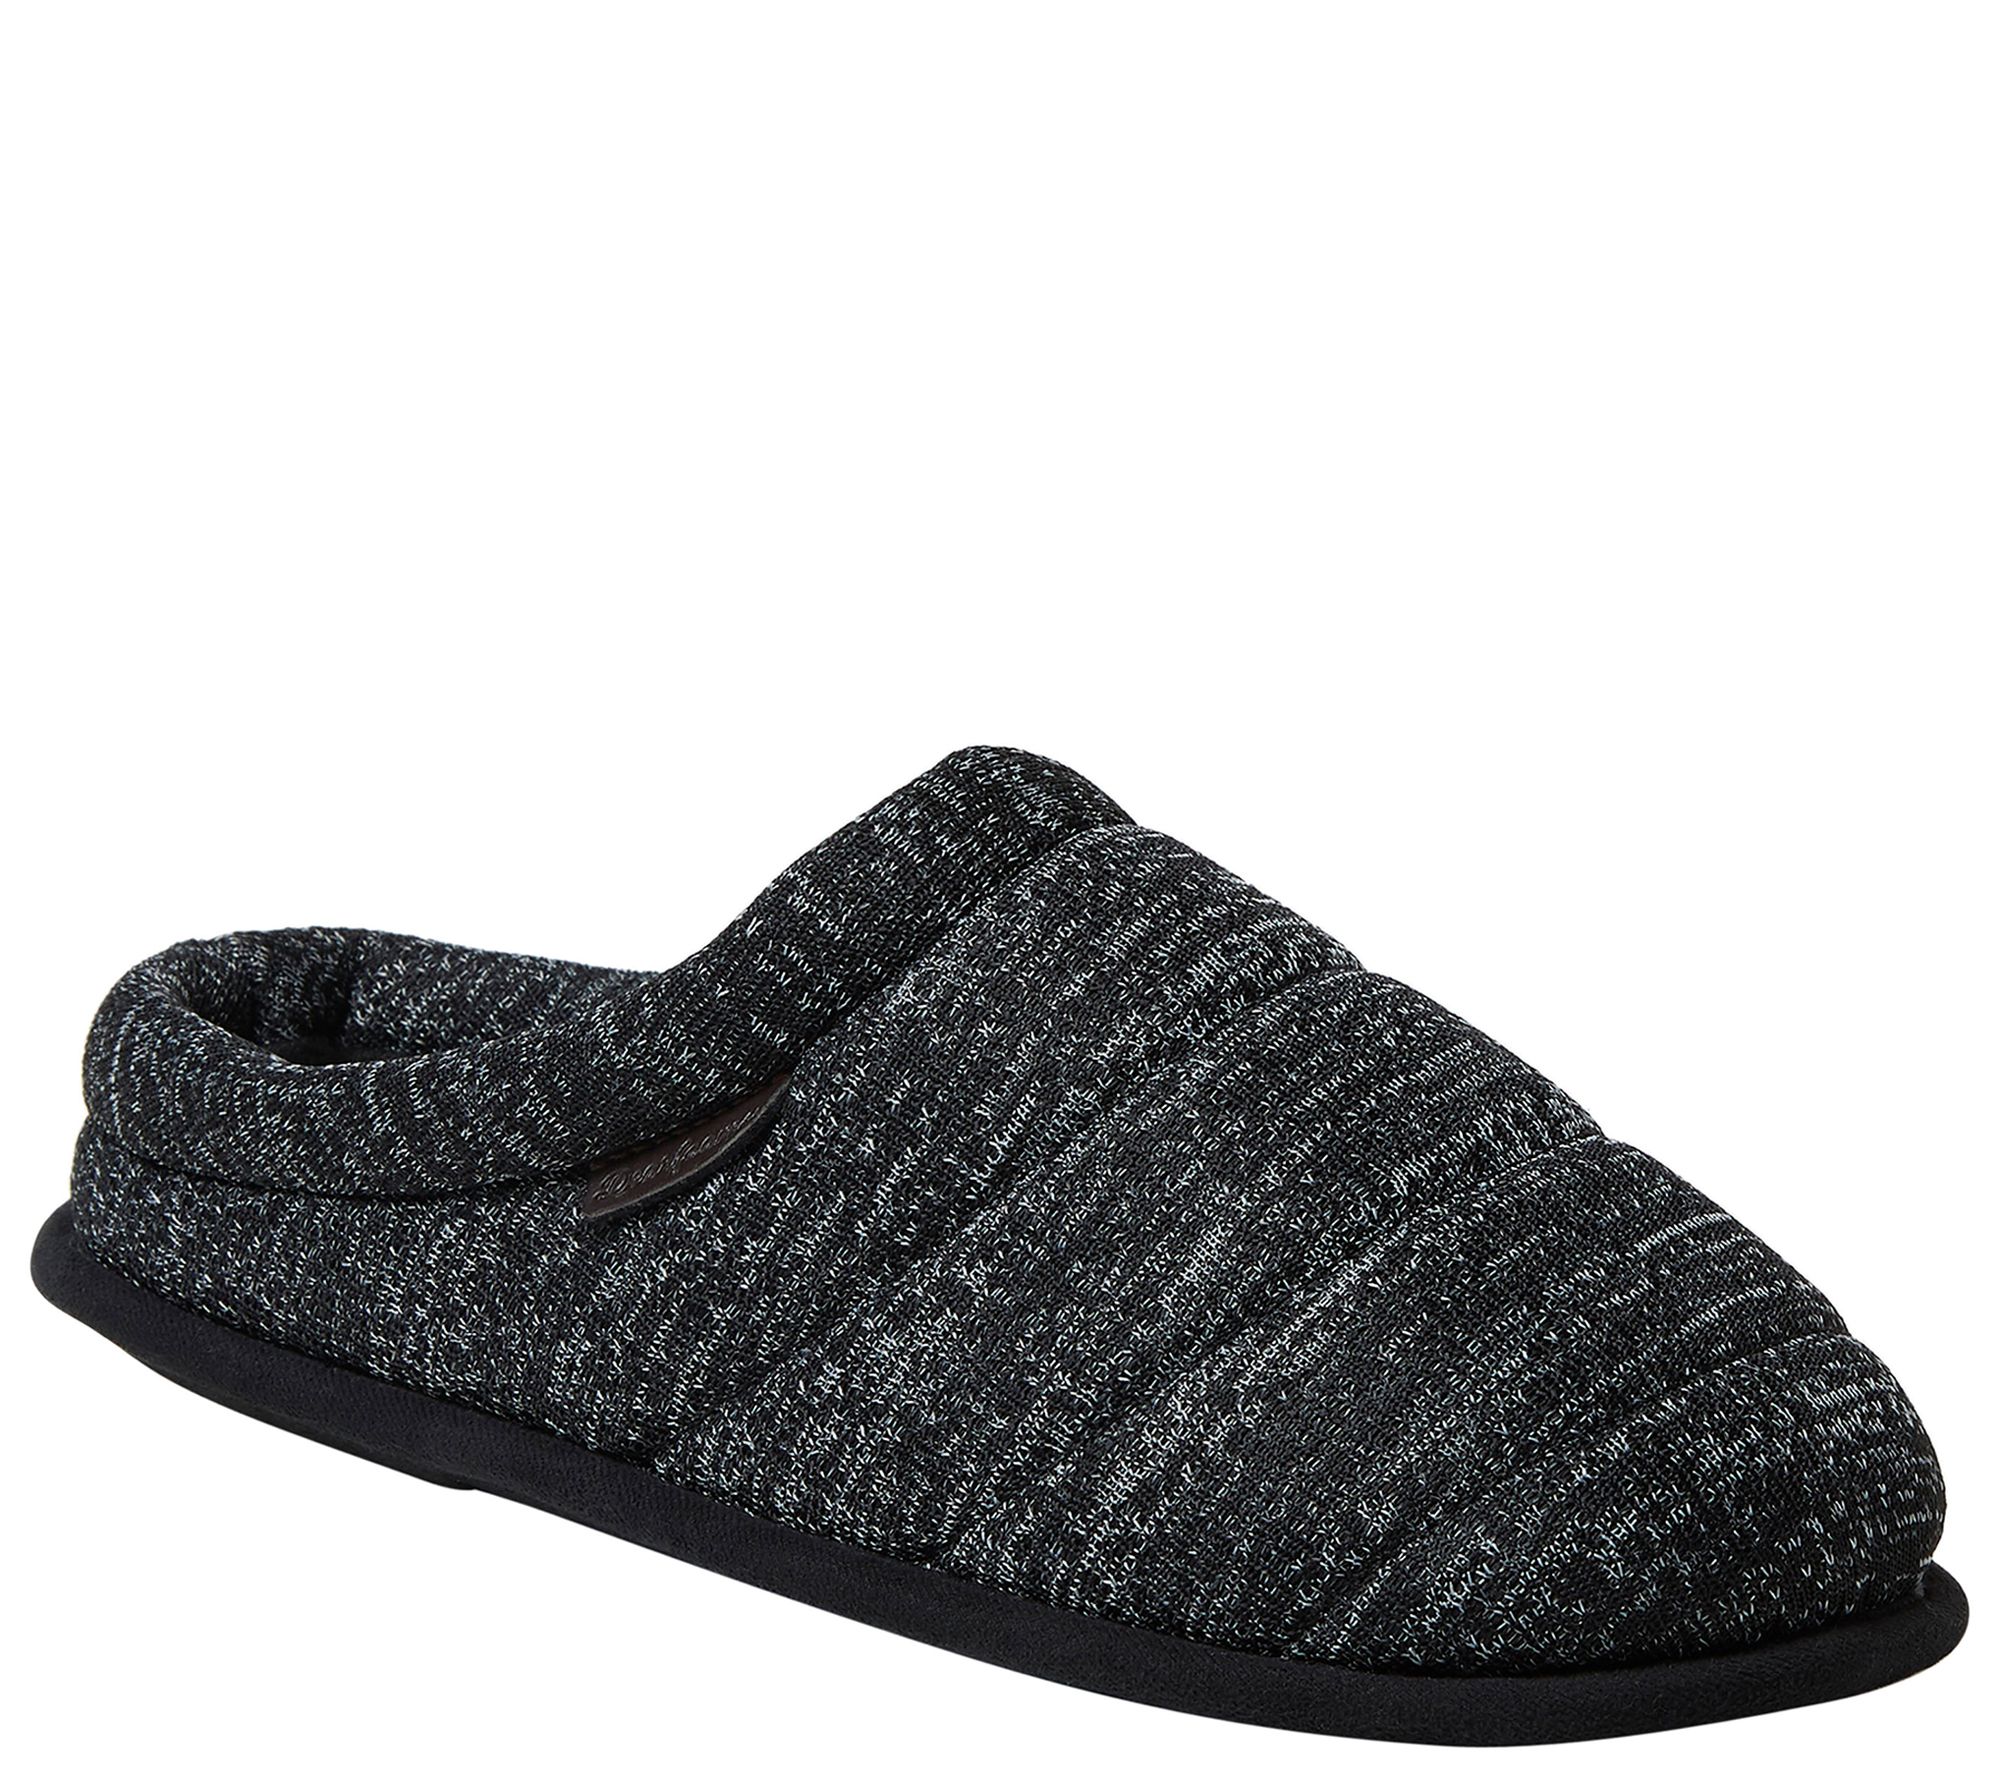 Dearfoams Men's Quilted Clog Slippers - QVC.com